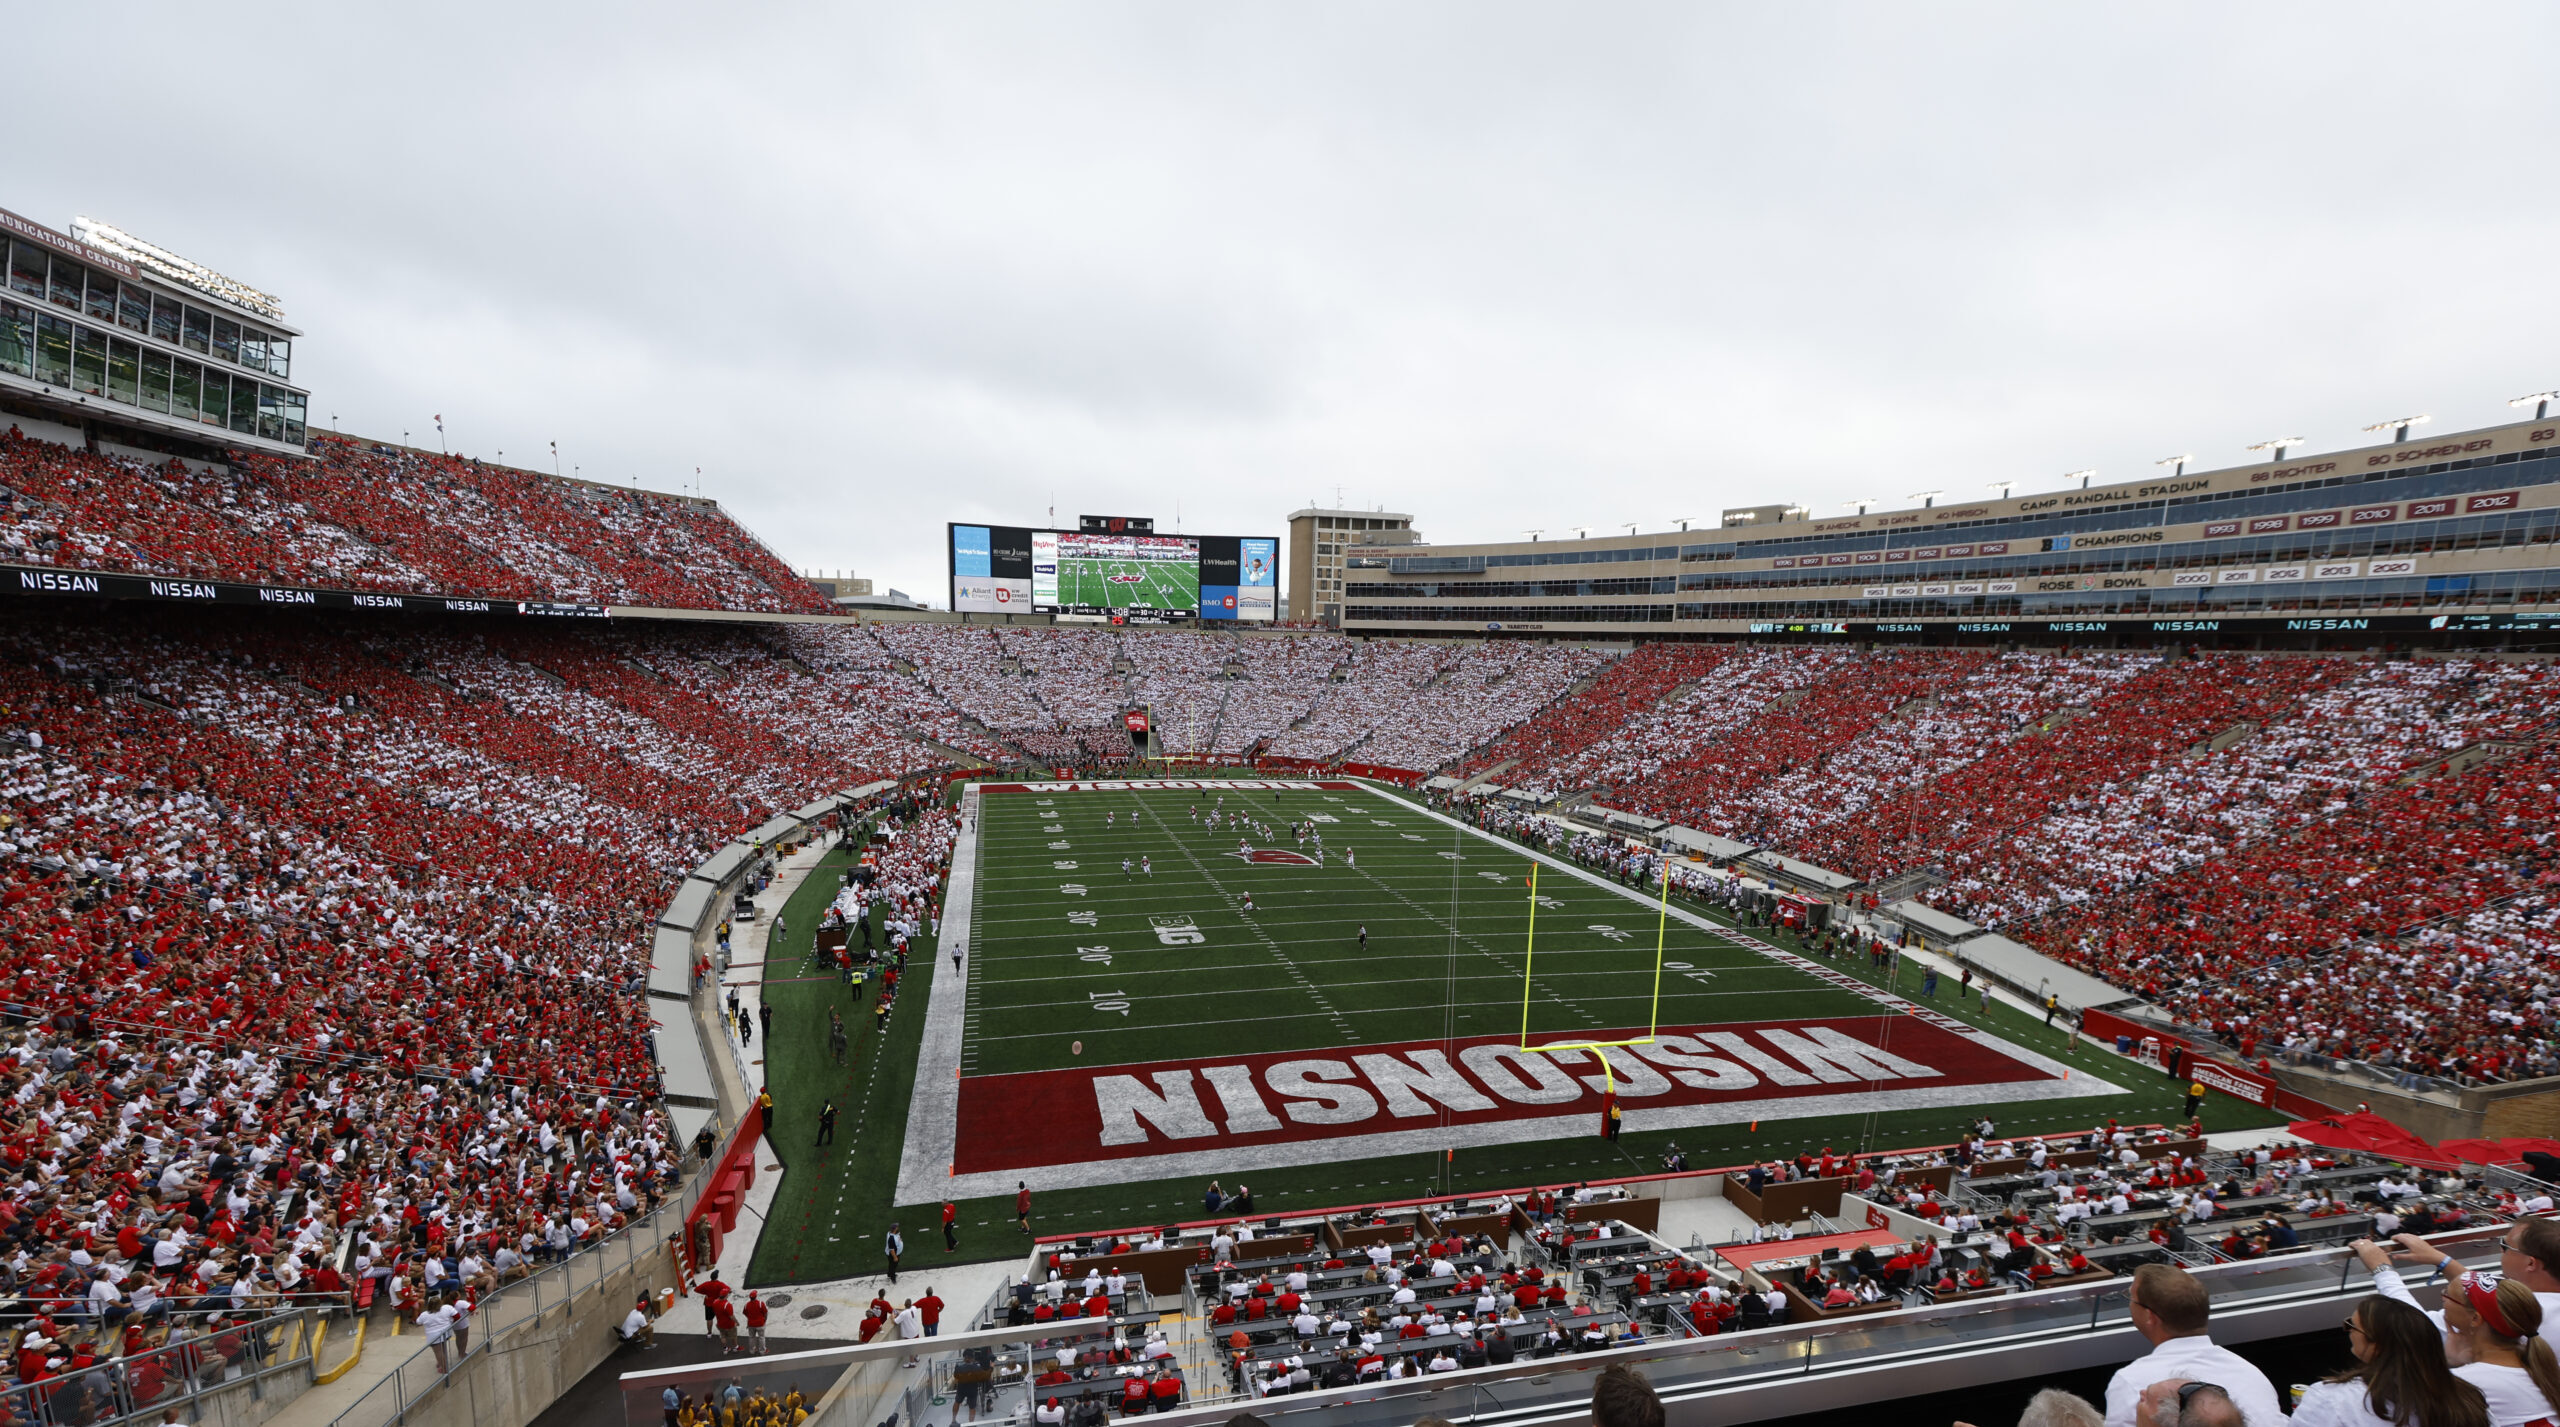 Wisconsin Badgers football plays its home games at Camp Randall Stadium